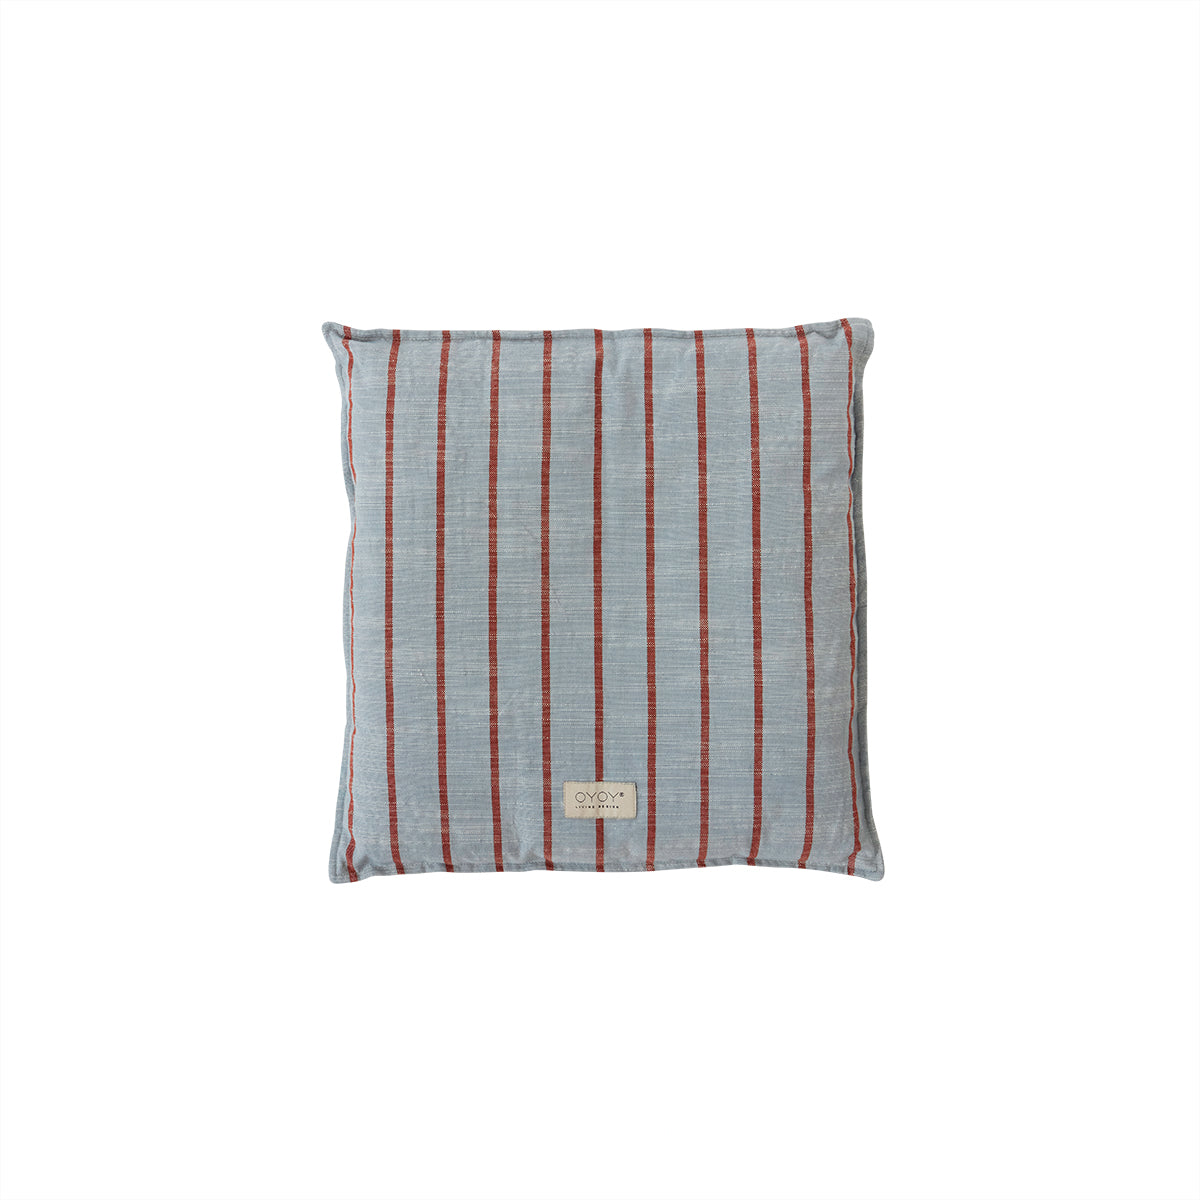 OYOY LIVING Outdoor Kyoto Cushion Square Cushion 603 Pale Blue